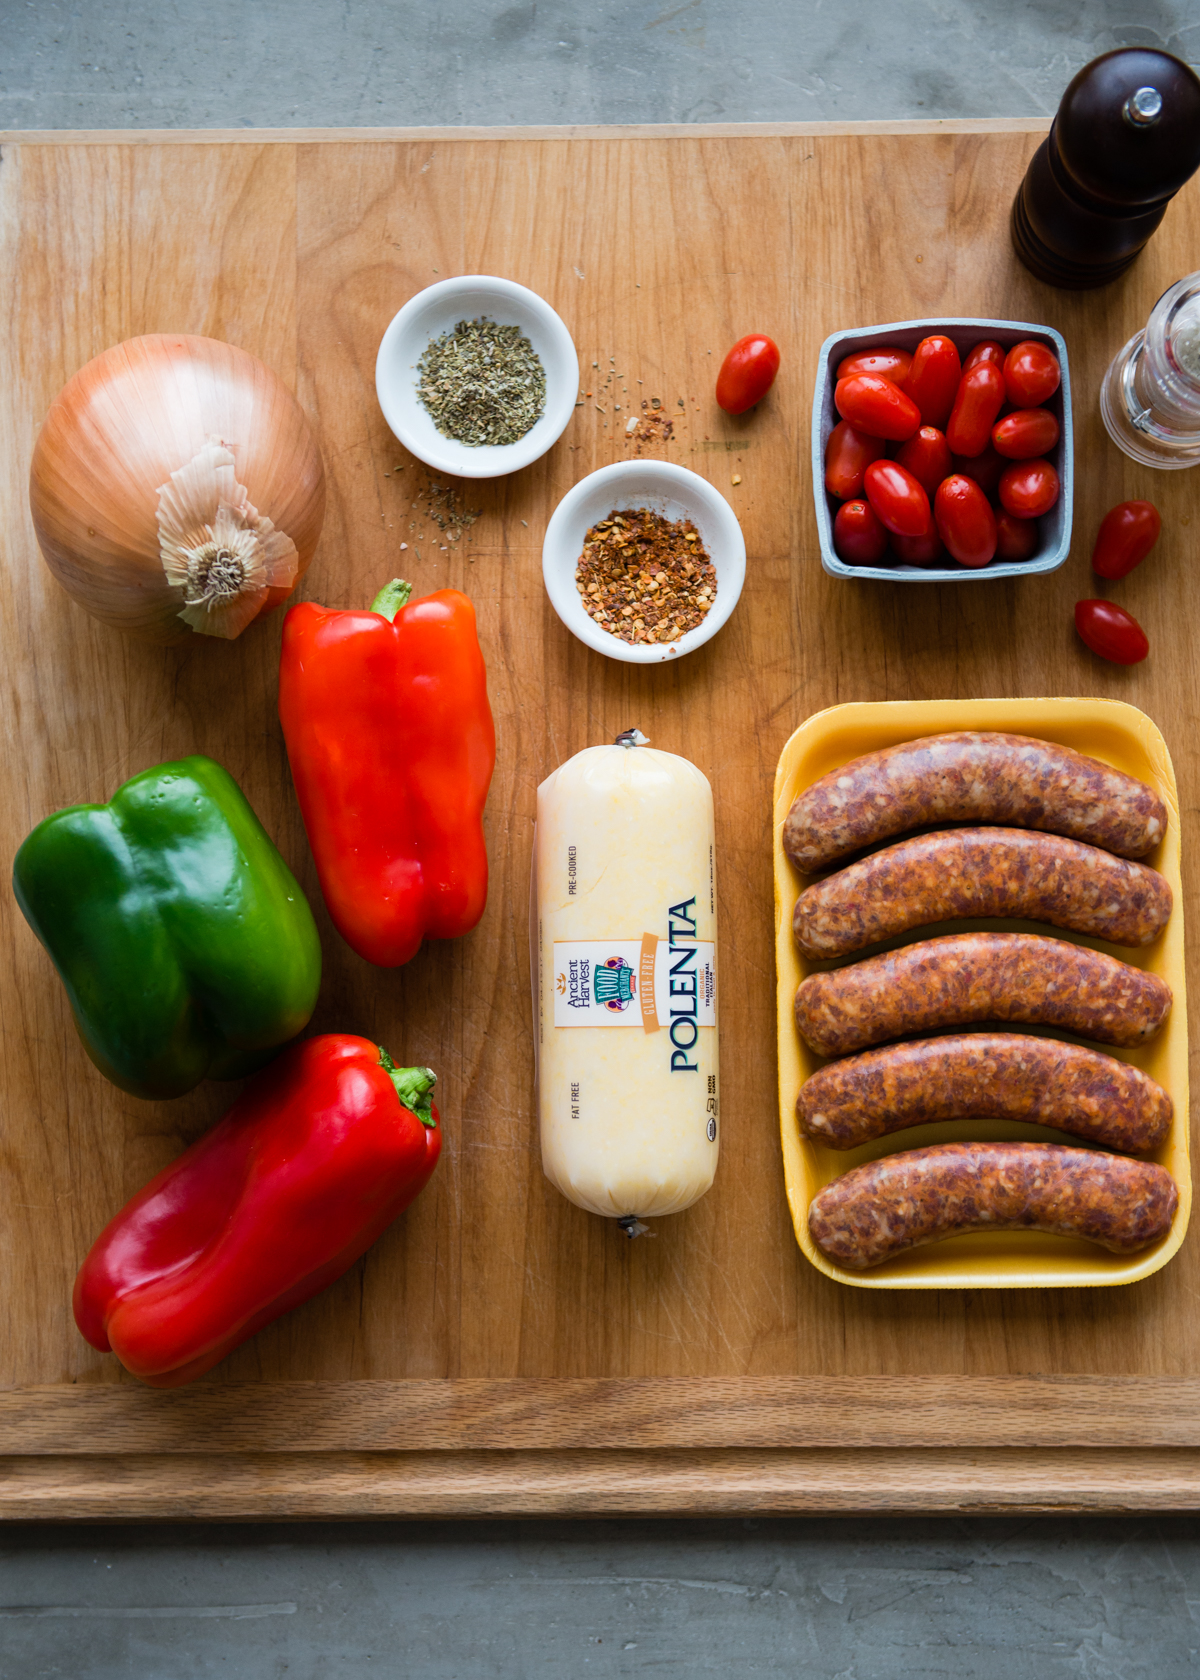 Ingredients for Sheet Pan Sausage and Peppers | DesignMom.com